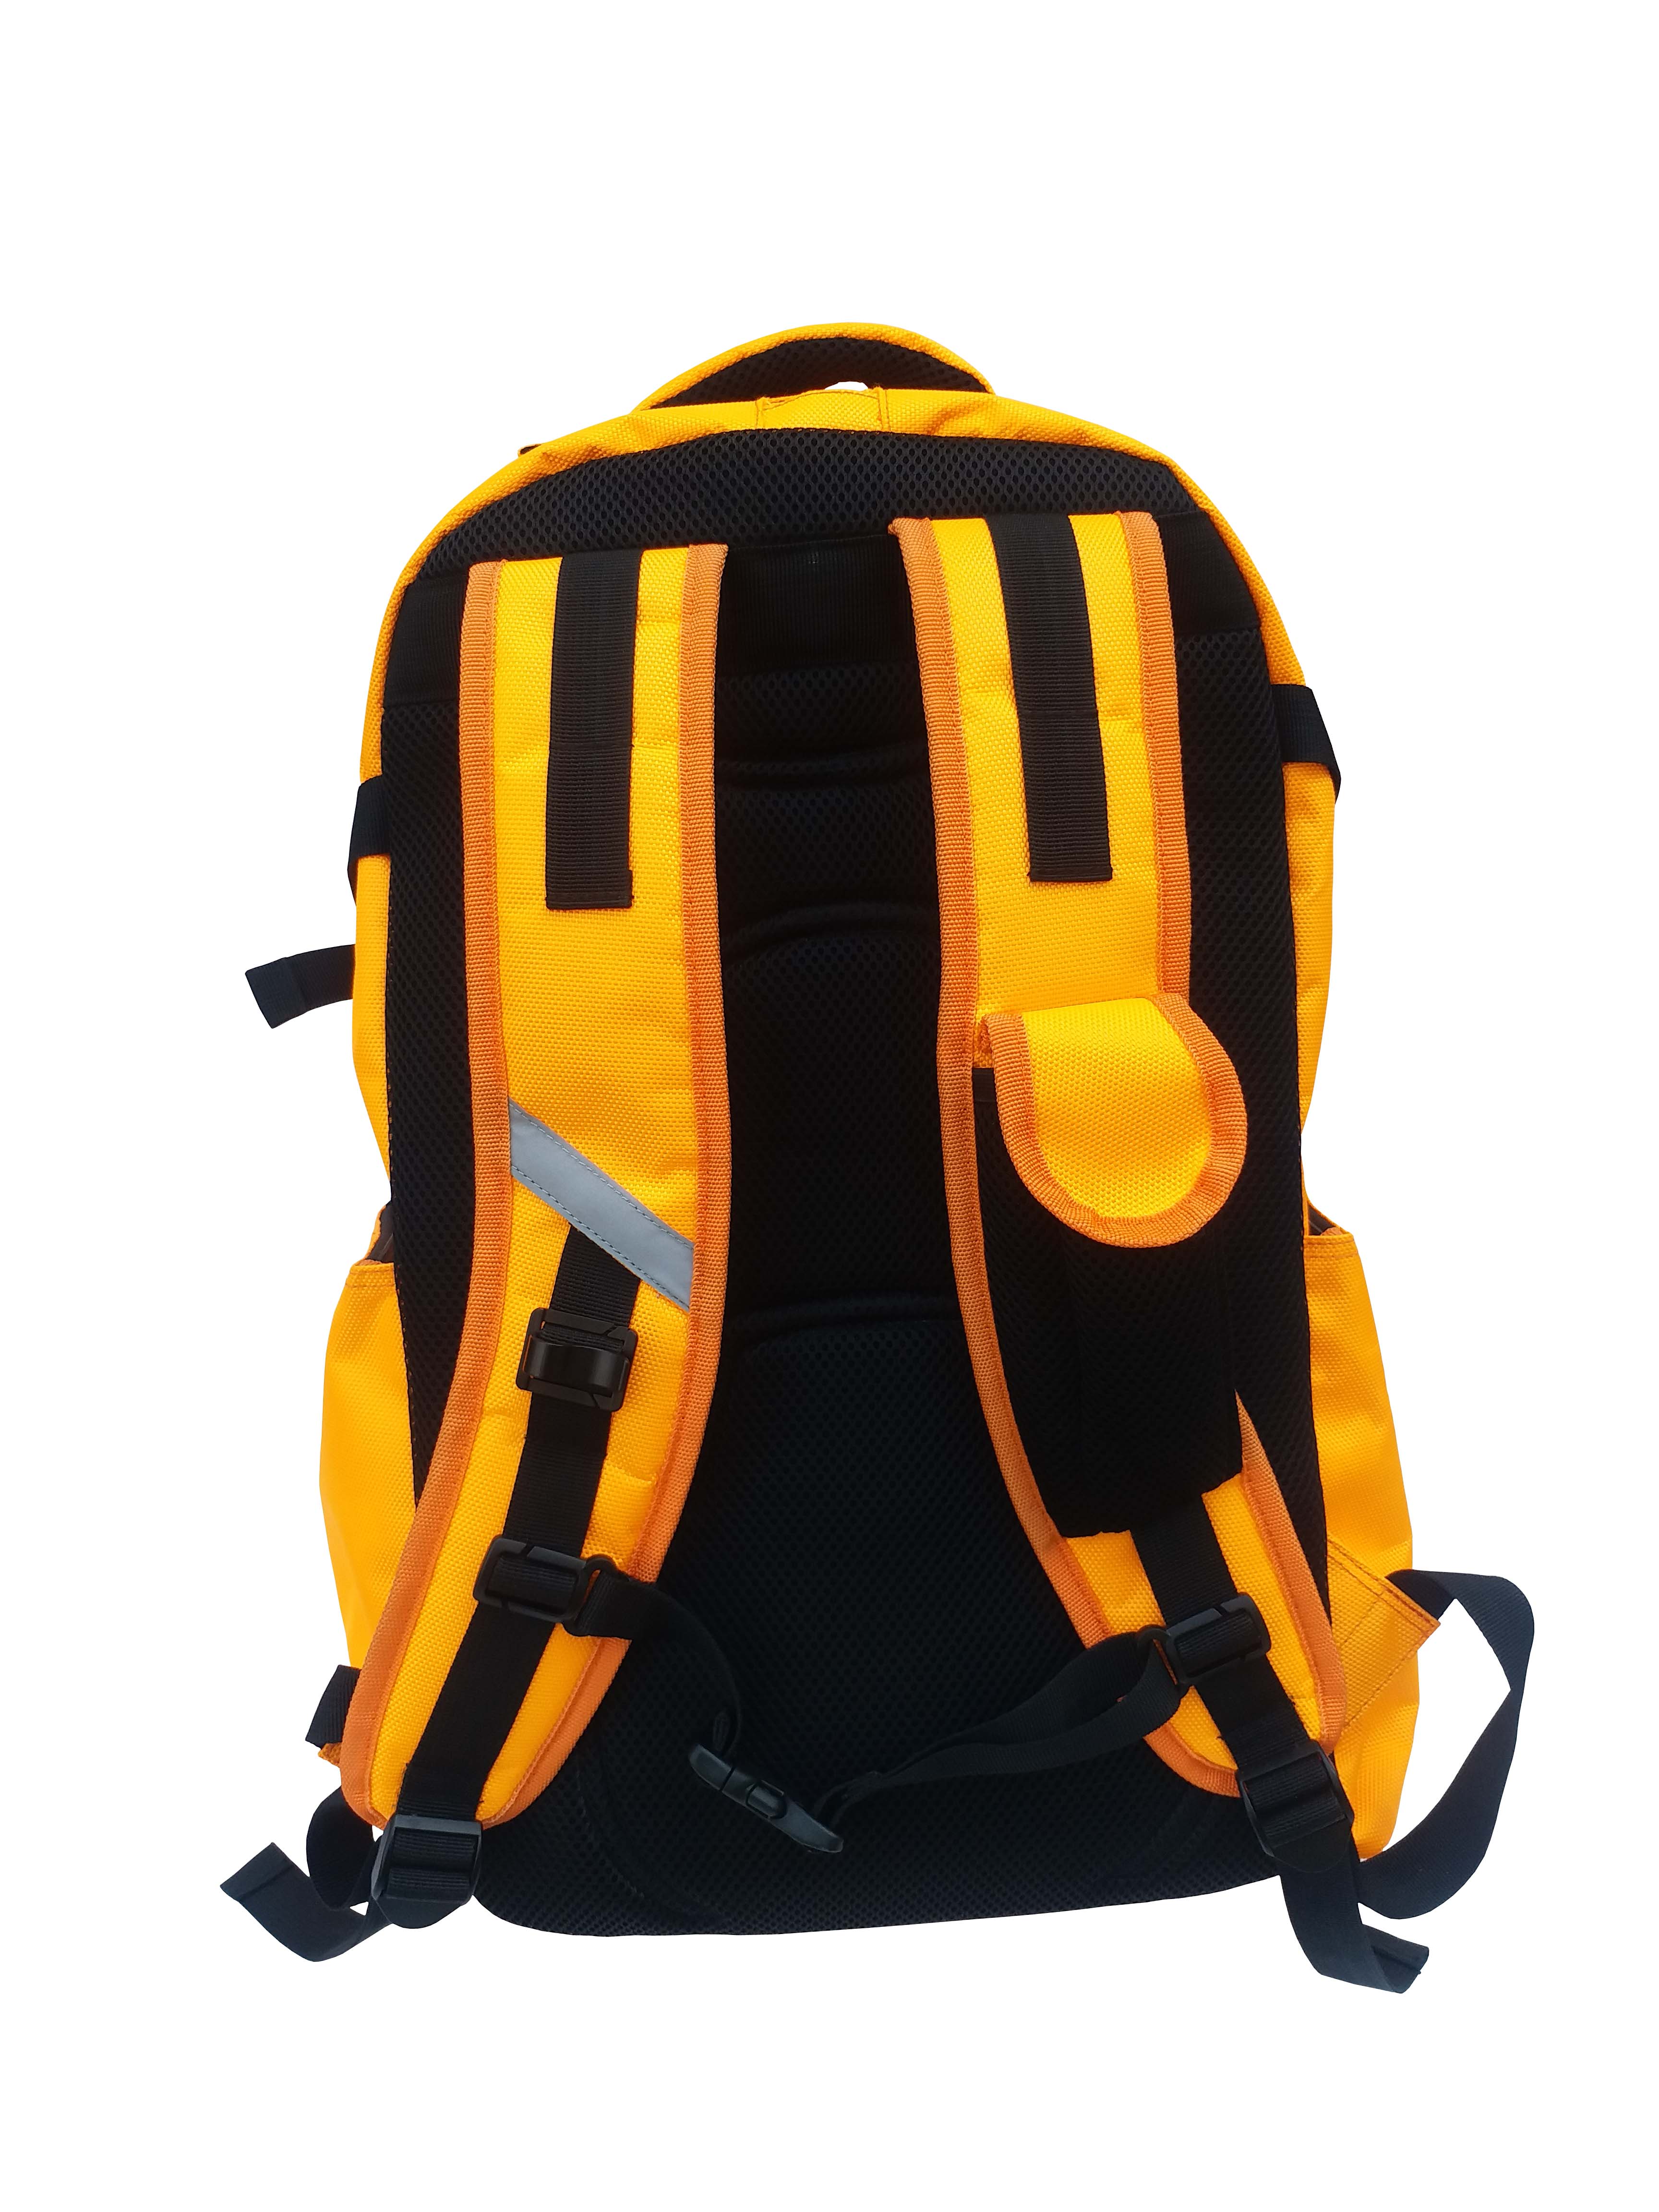 Professional Durable Customize High Visibility Reflective Tape Safety Fireman Backpack